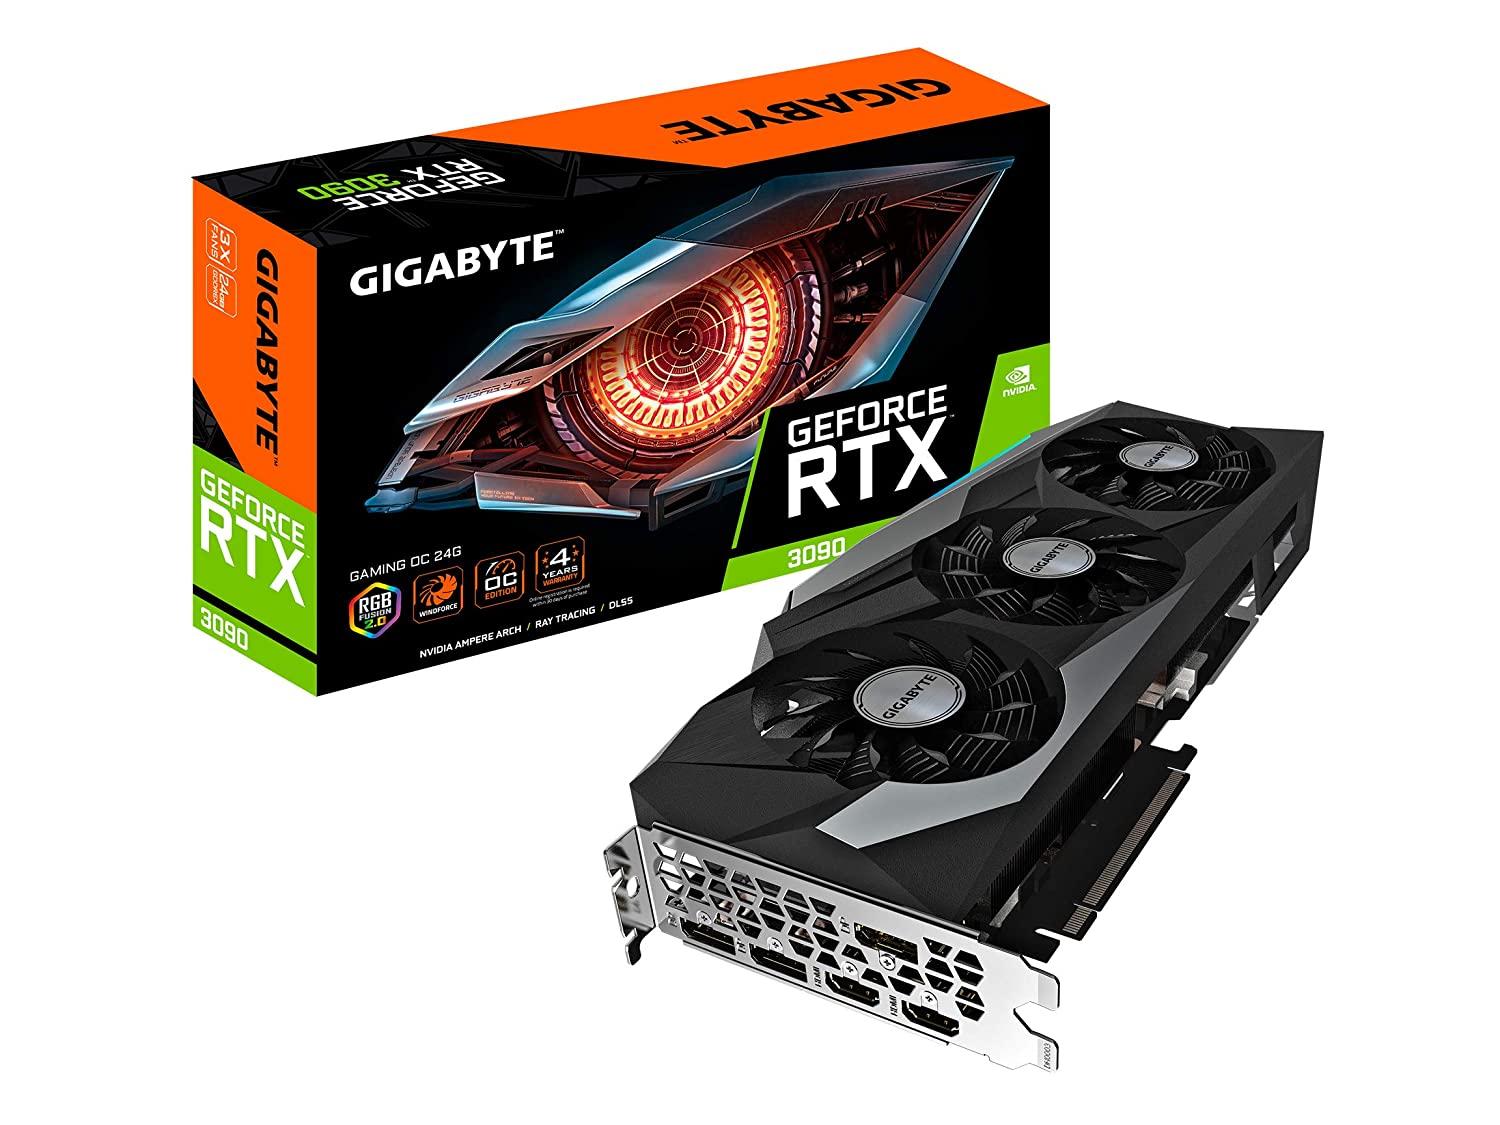 GIGABYTE GeForce RTX 3090 Gaming OC 24G Graphics Card, 3X WINDFORCE Fans,  24GB 384-bit GDDR6X, GV-N3090GAMING OC-24GD Video Card : Amazon.in:  Computers &amp;amp; Accessories